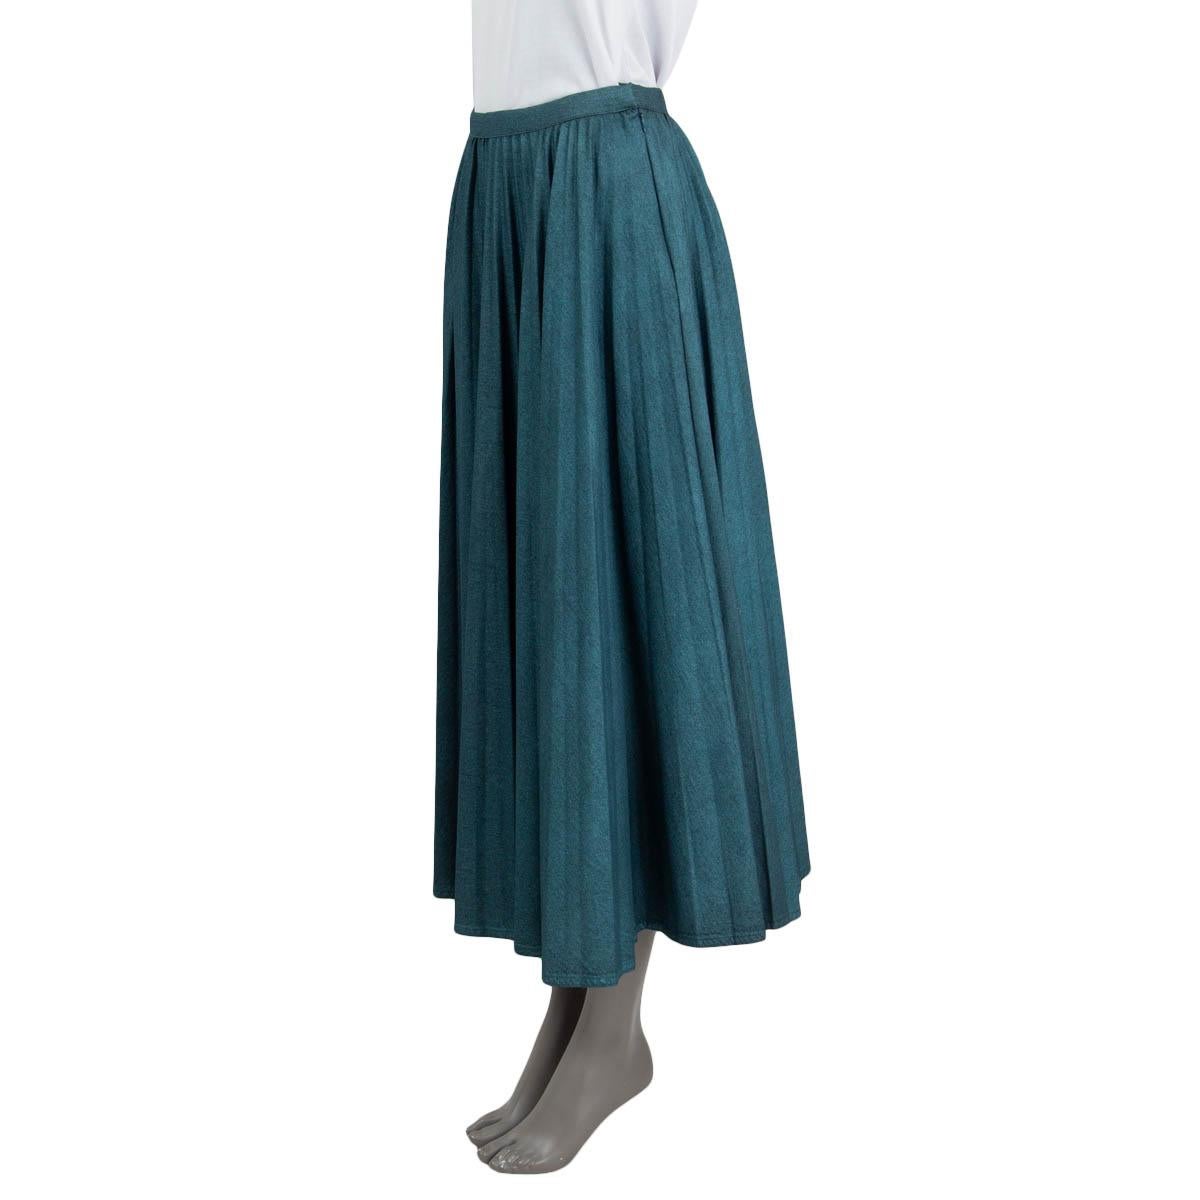 100% authentic Christian Dior 2021 pleated glitter denim midi skirt in petrol cotton (100%). Opens with a concealed zipper and a push button on the side. Unlined. Has been worn once and is in virtually new condition.

Measurements
Tag